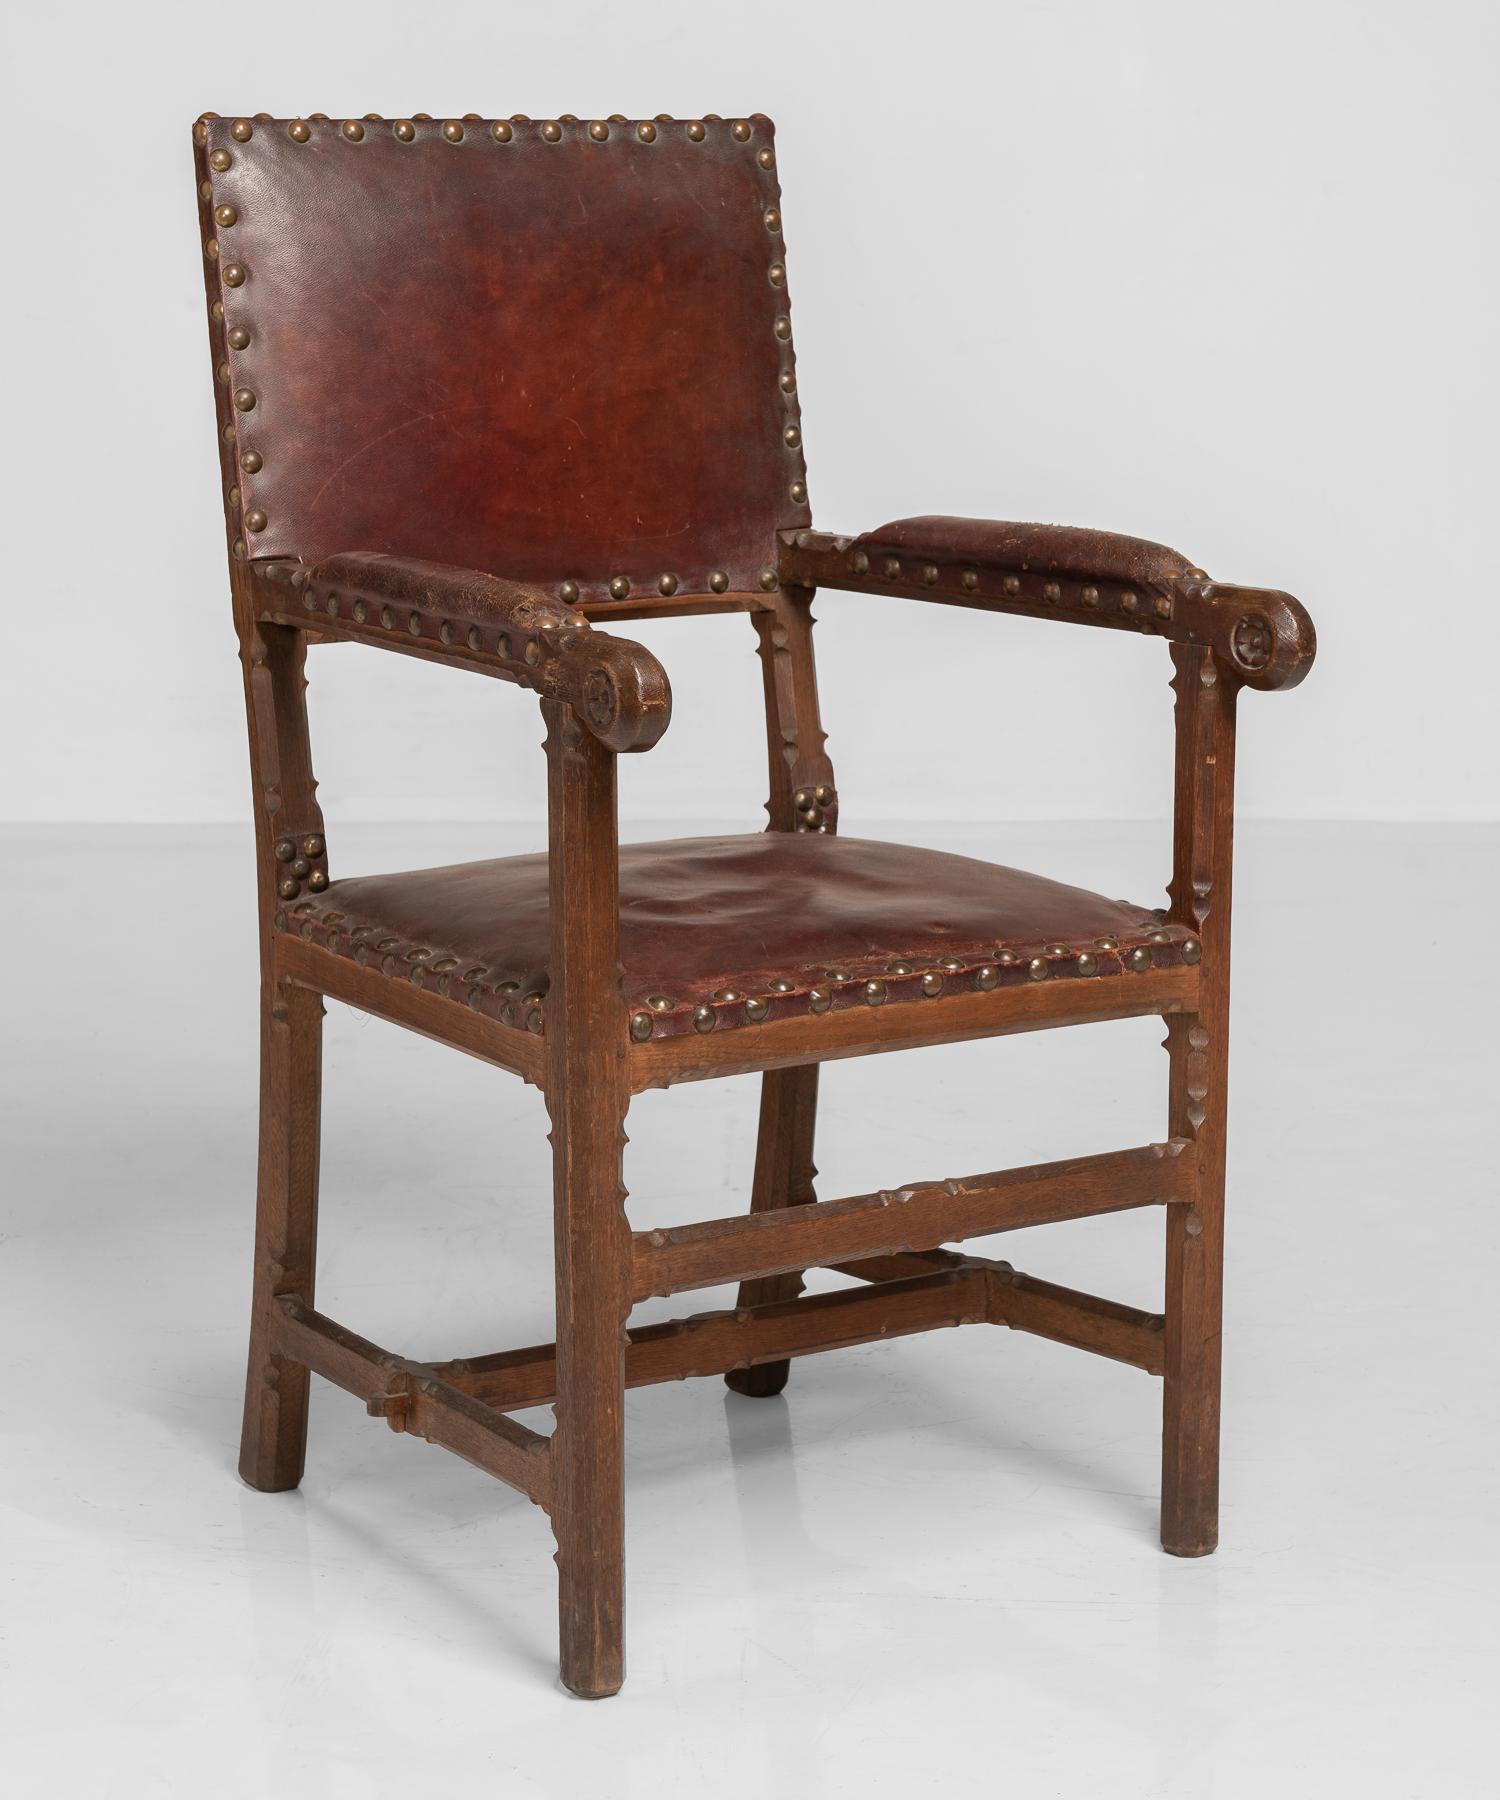 Gothic oak and leather armchair, England, circa 1860.

Beautiful oak frame with unique detailing and original leather upholstery. Attributed to J.P. Seddon.